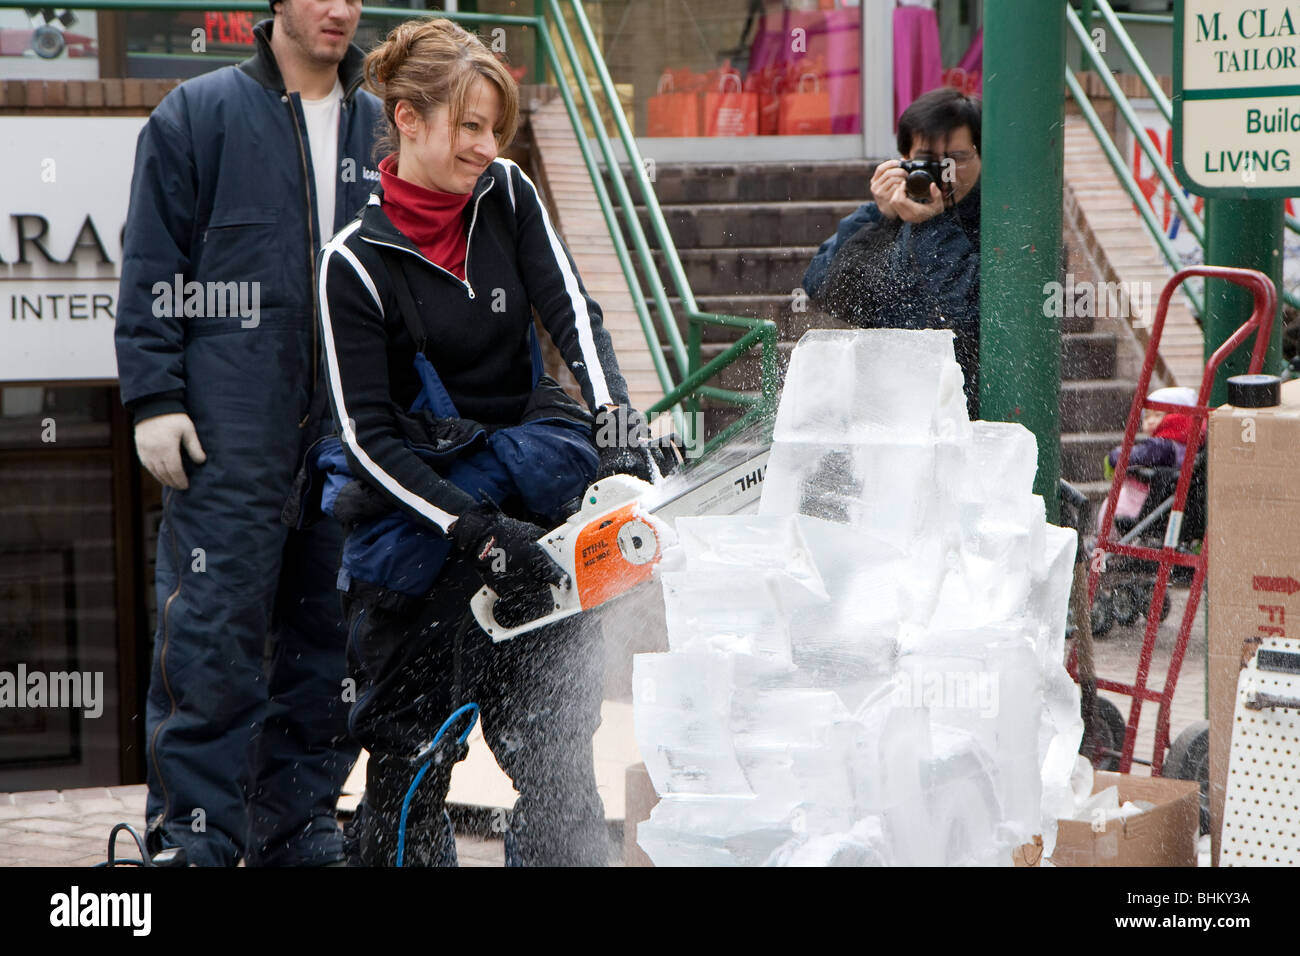 An ice carving artist works on the big block of ice while a photographer took a picture from behind Stock Photo